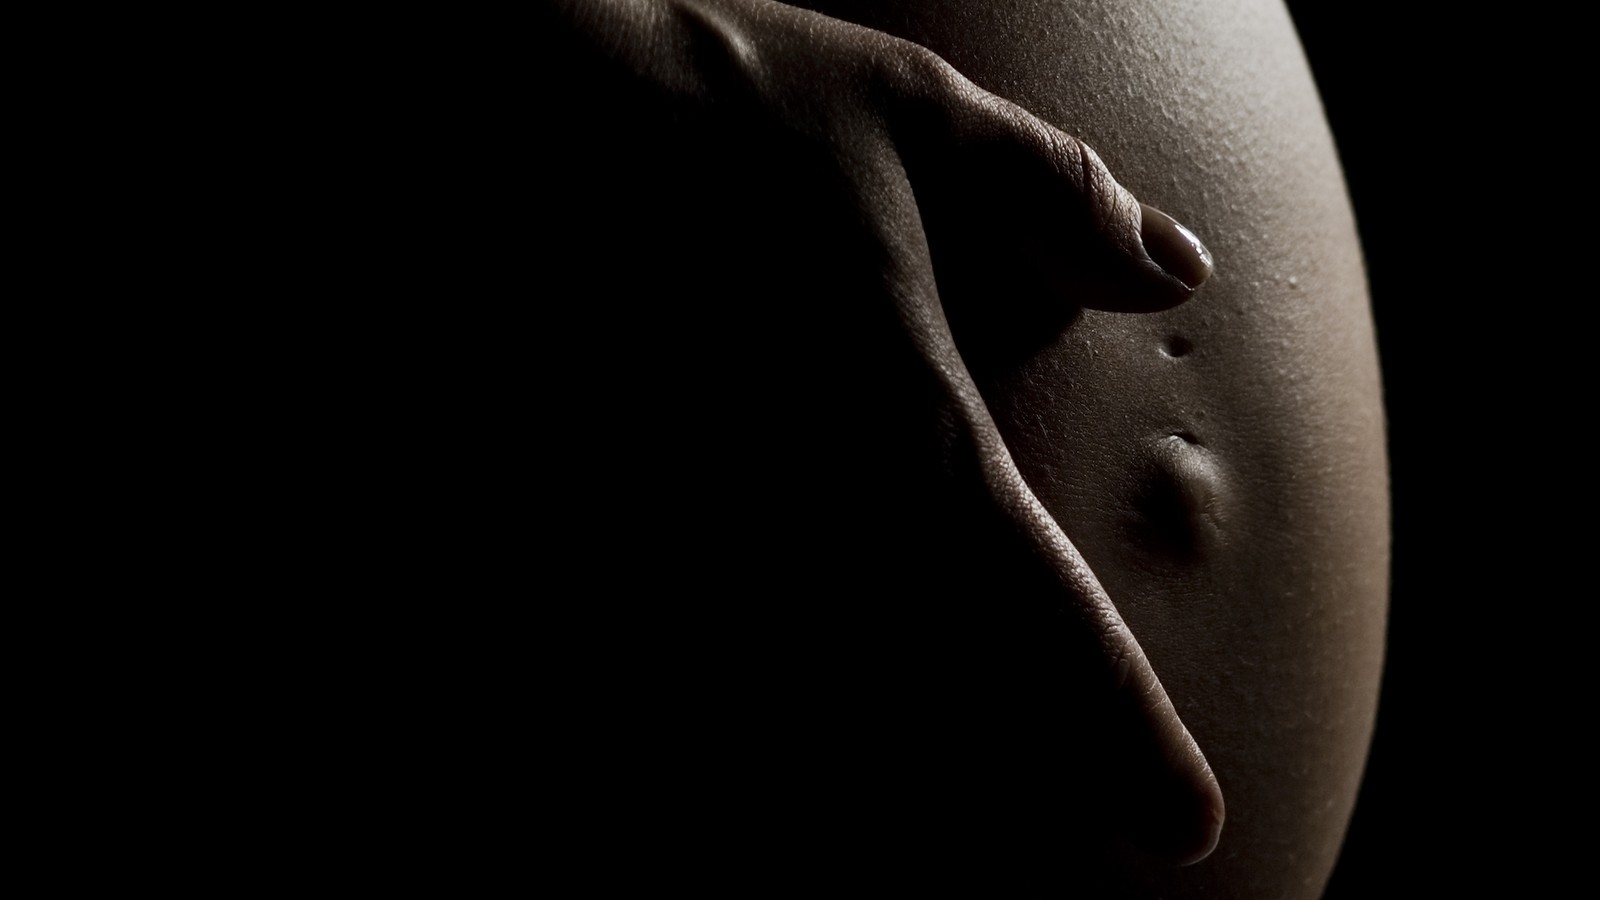 Rate My Pregnant Tits - In Defense of Saying 'Pregnant Women' - The Atlantic